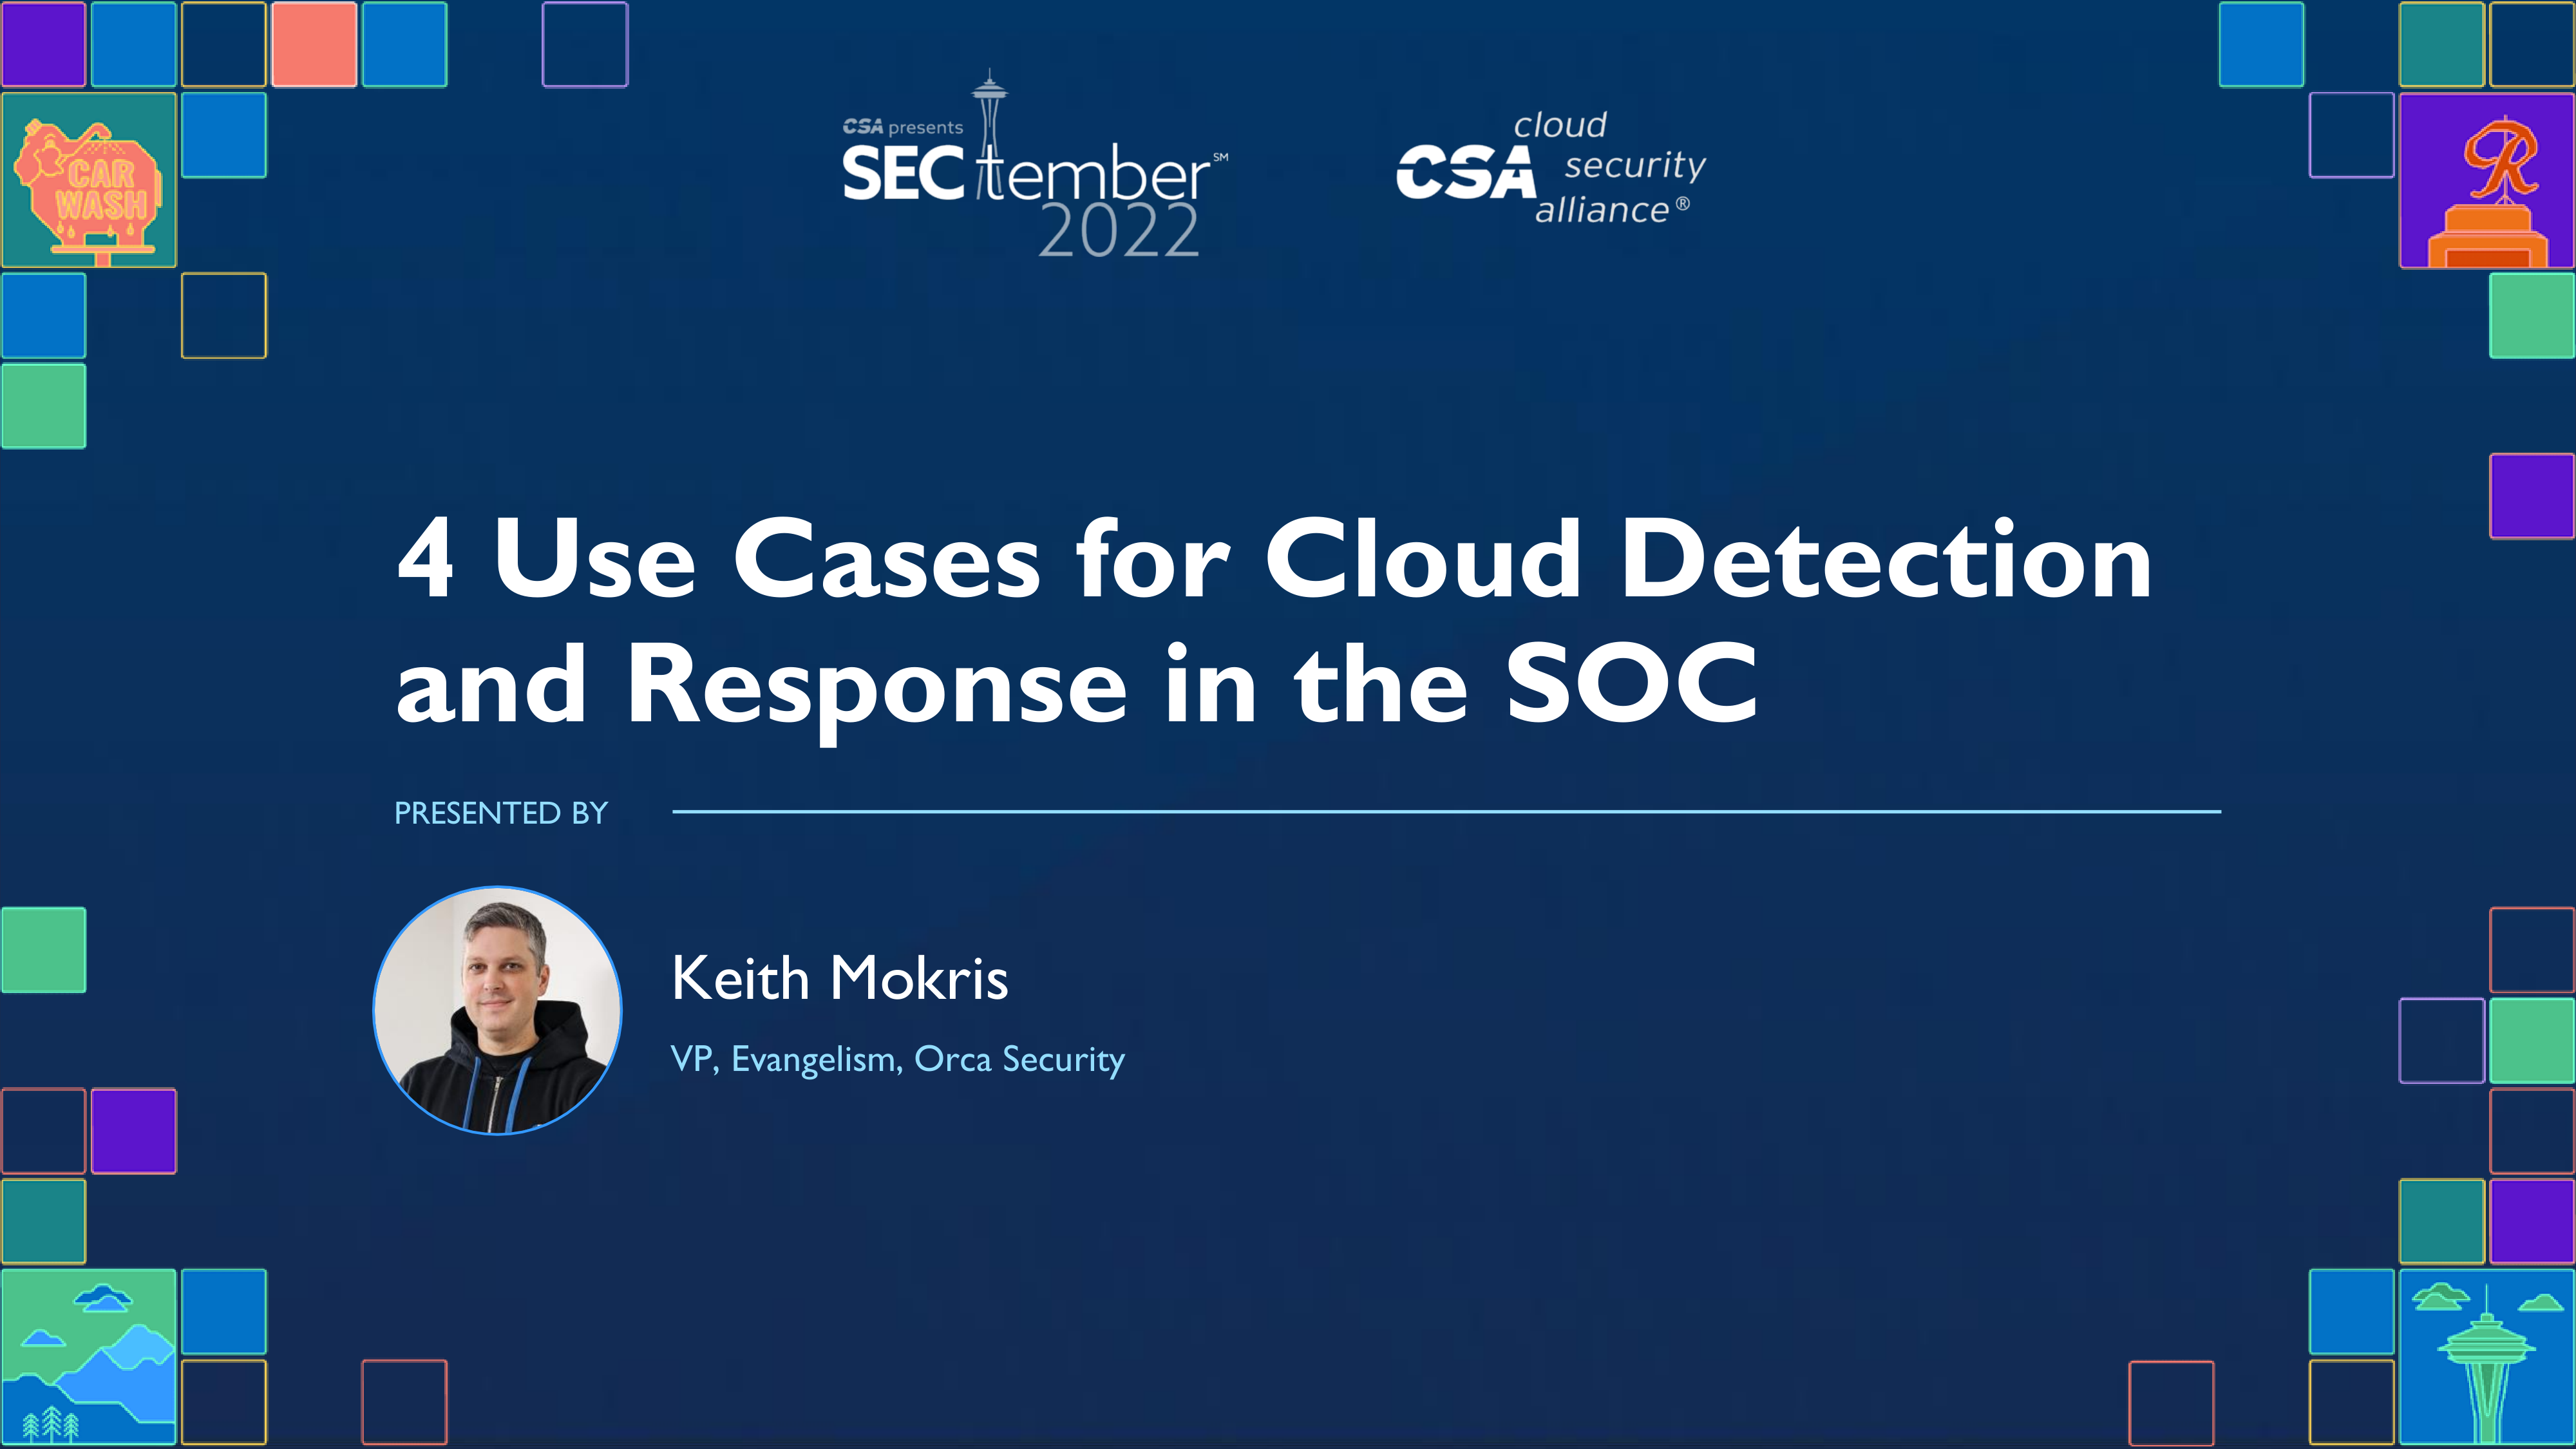 4 Use Cases for Cloud Detection and Response in the SOC